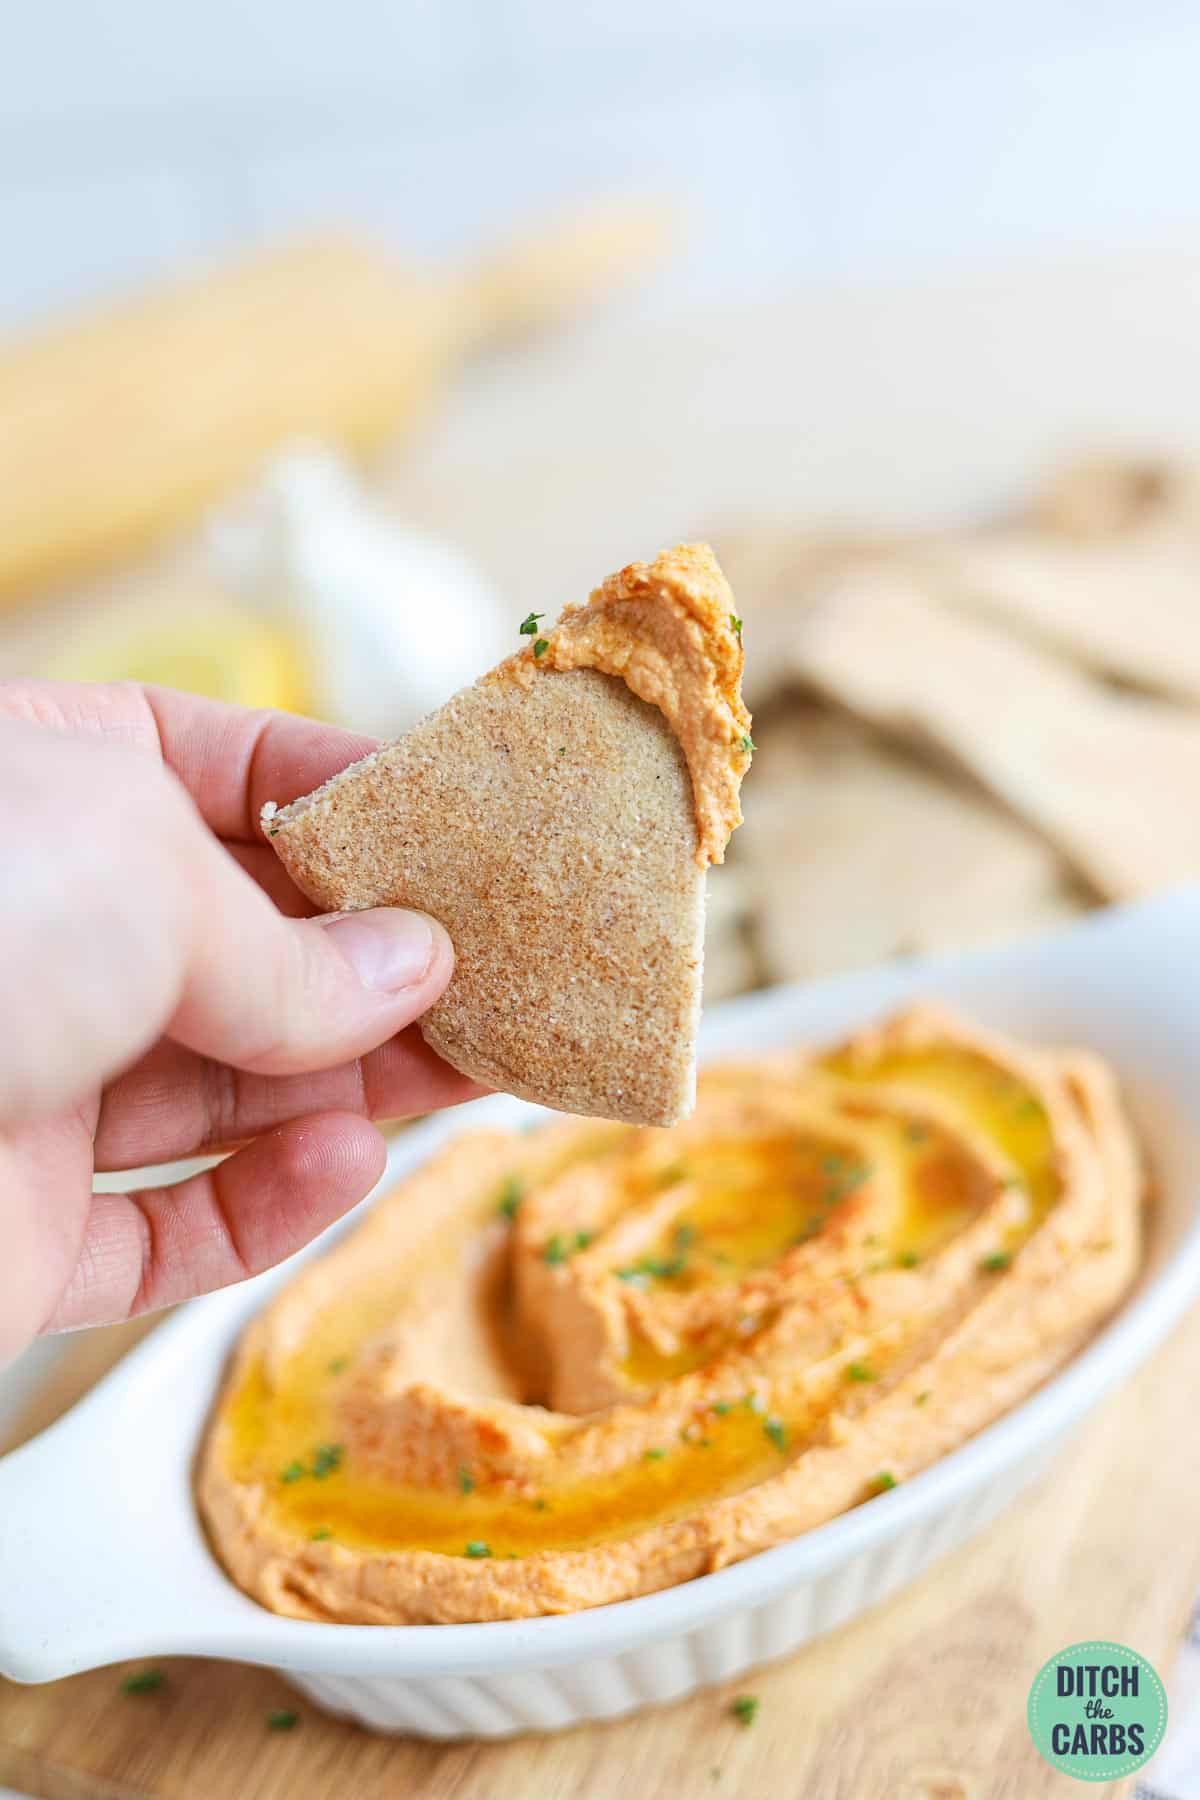 A hand is lifting a low-carb pita cut into triangle up from a dish of hummus.